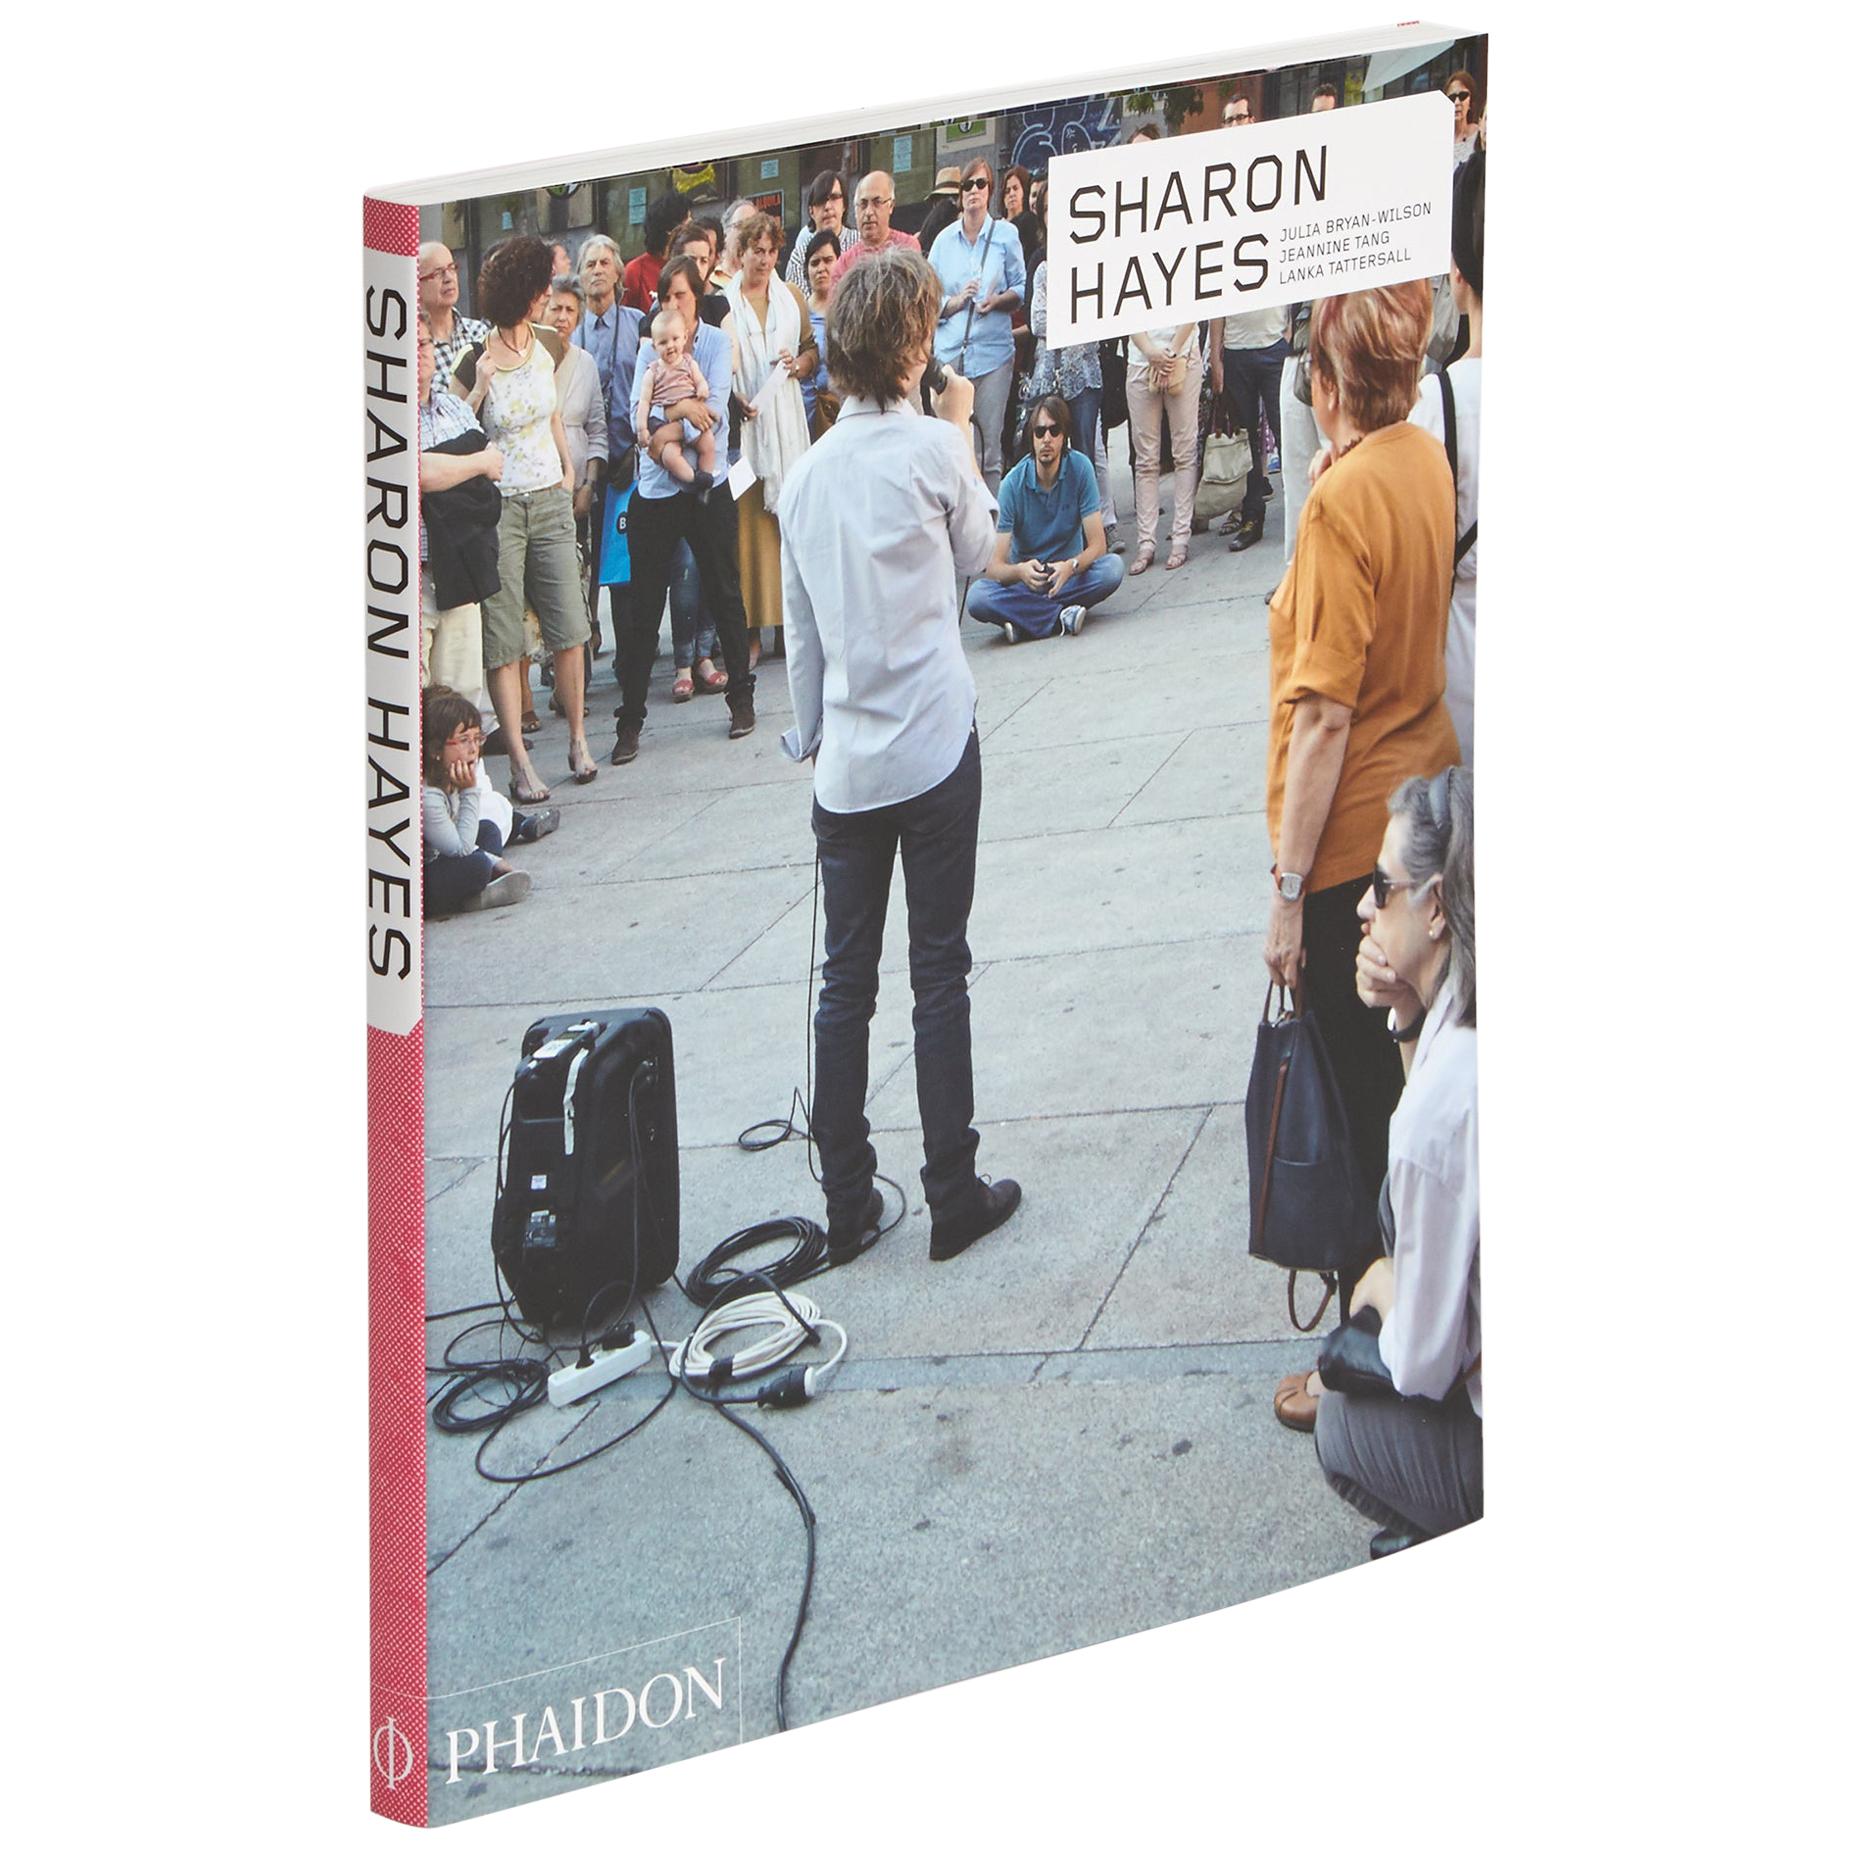 Sharon Hayes 'Phaidon Contemporary Artists Series' For Sale